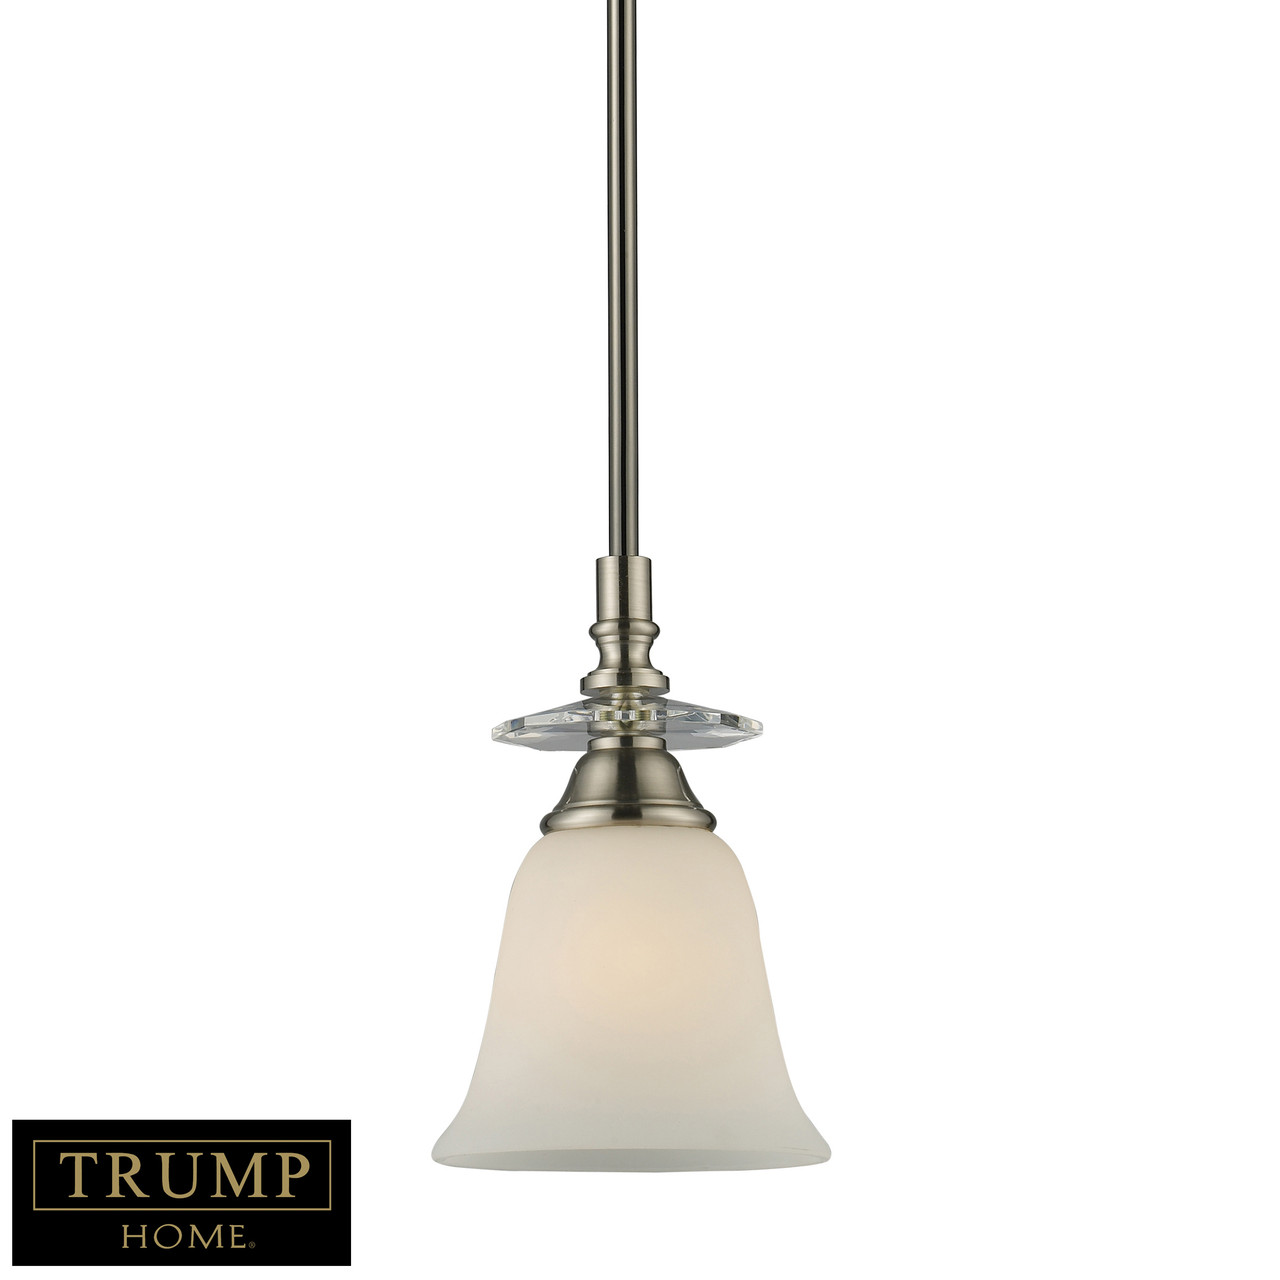 ELK LIGHTING 15123/1 1-Light Pendant in Black Chrome with Polished Nickel Accents